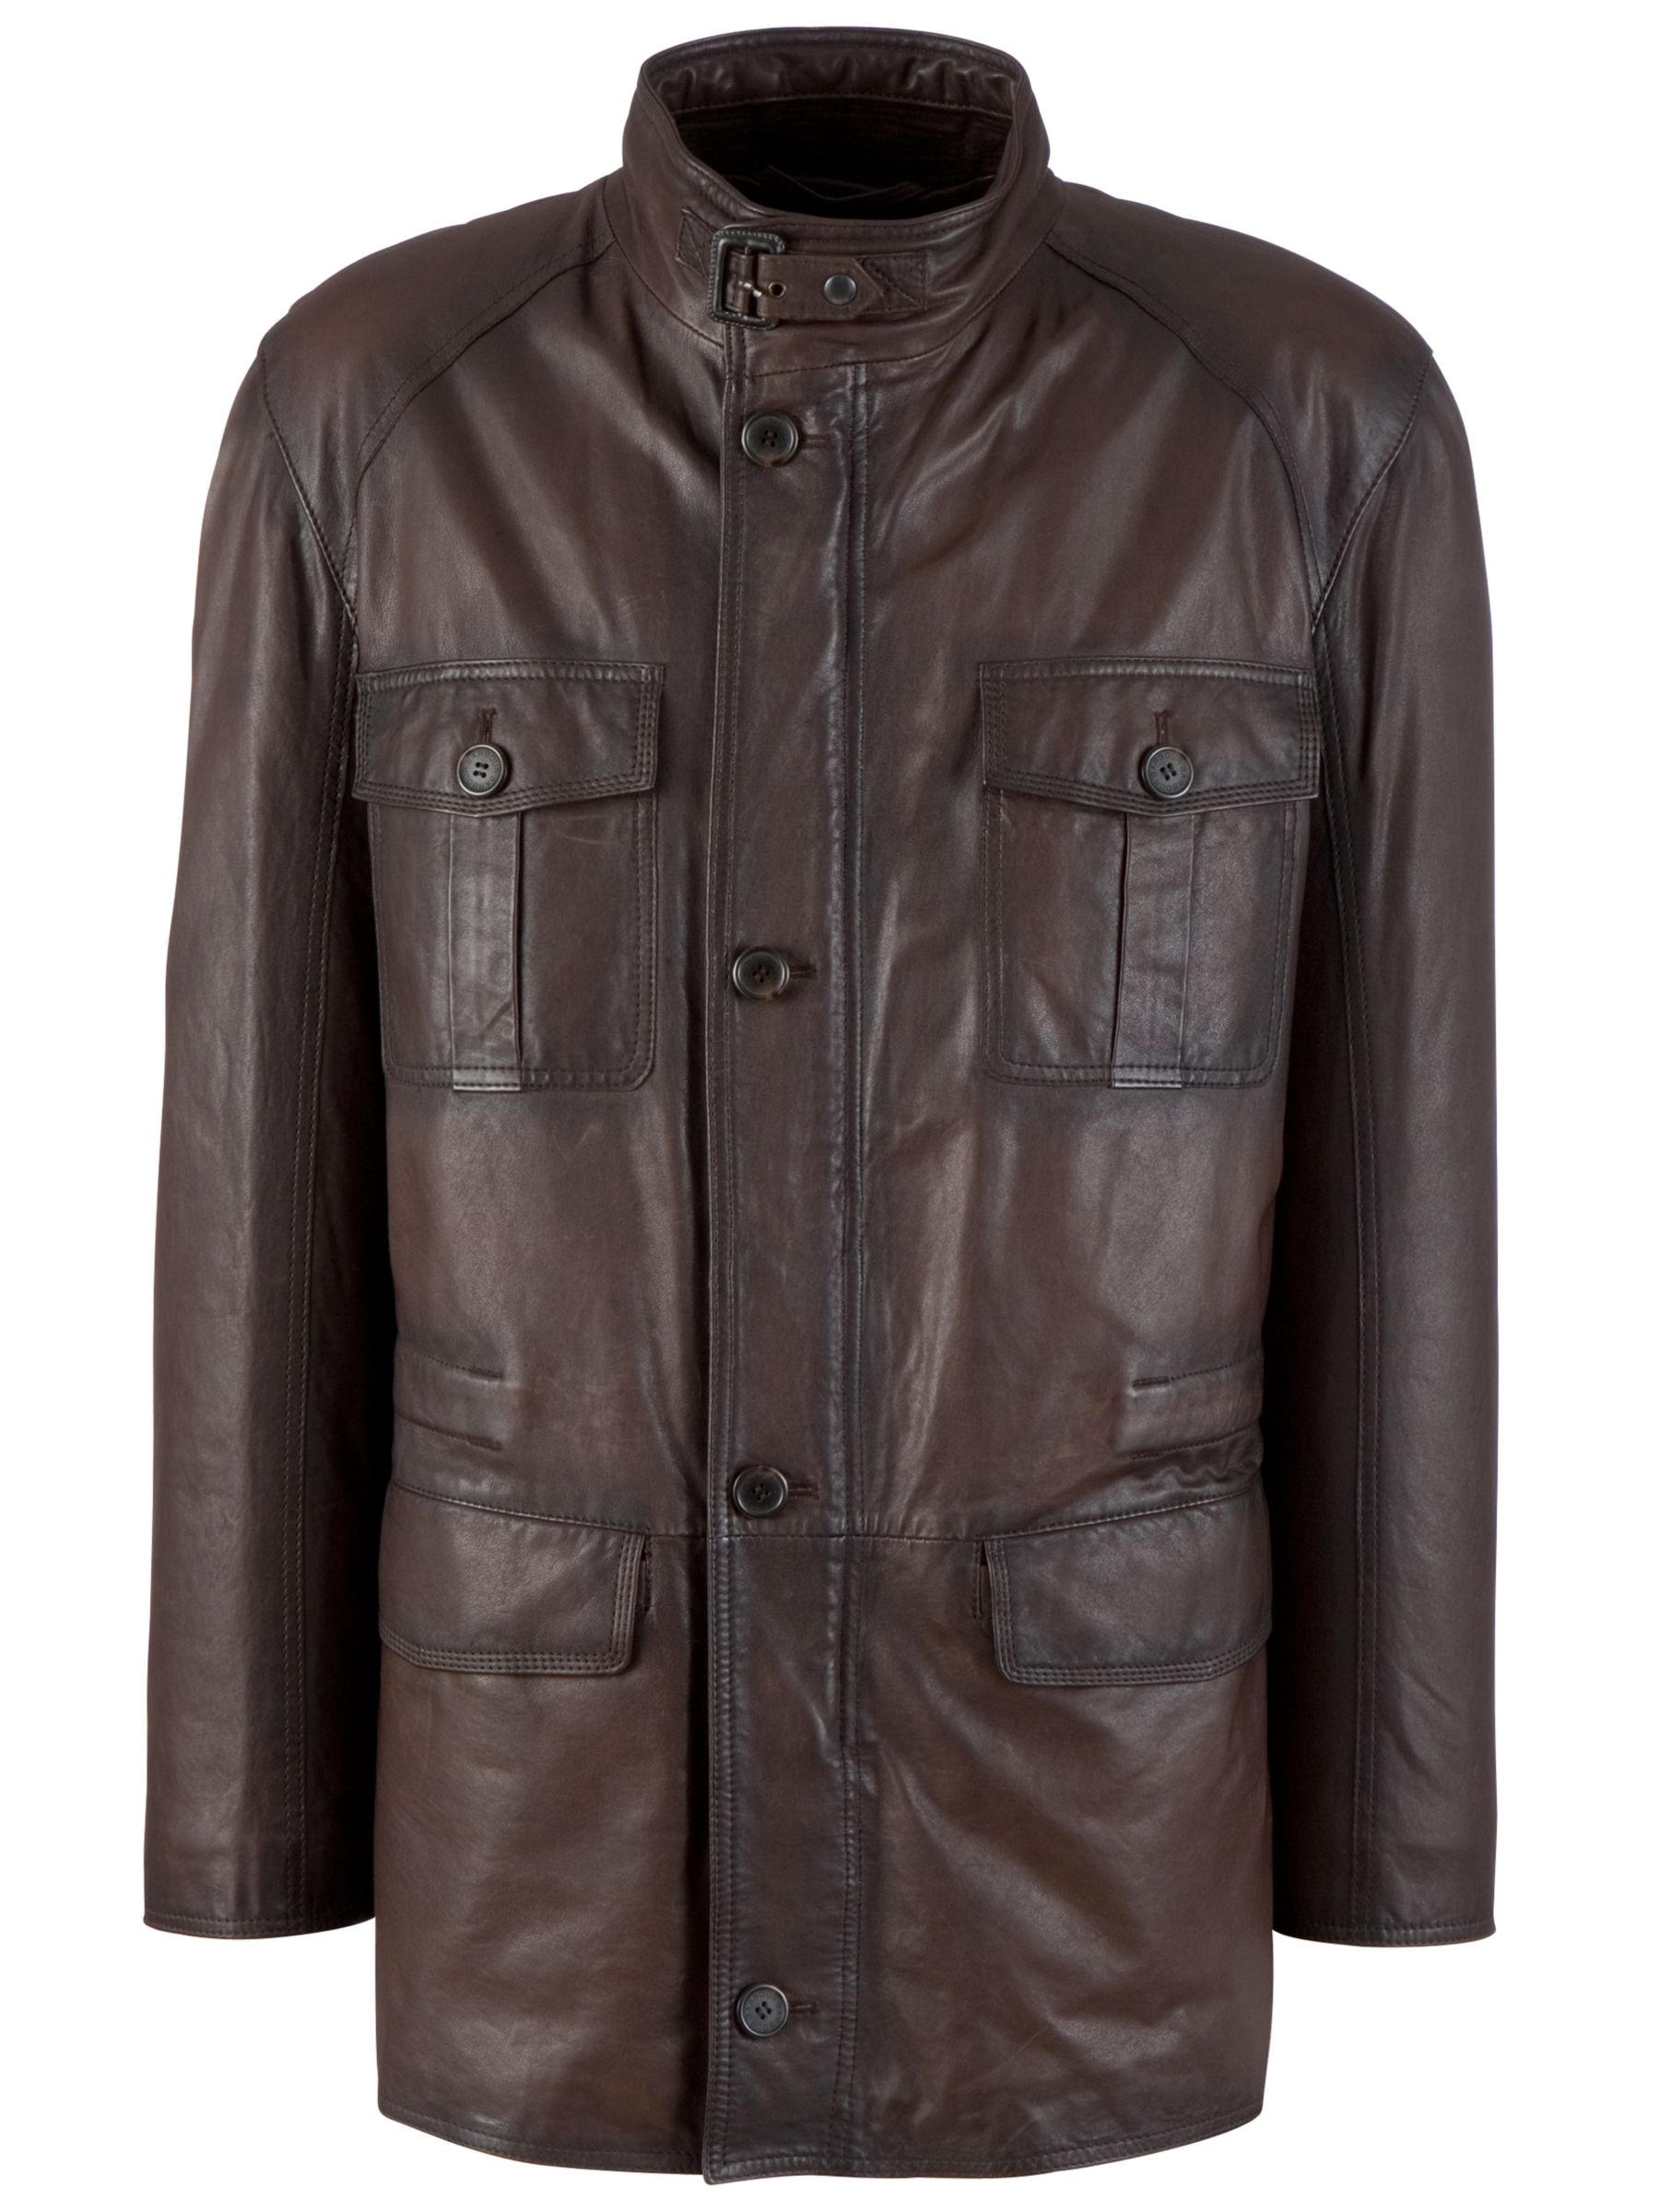 Barbour Sapper Leather Jacket, Brown at JohnLewis